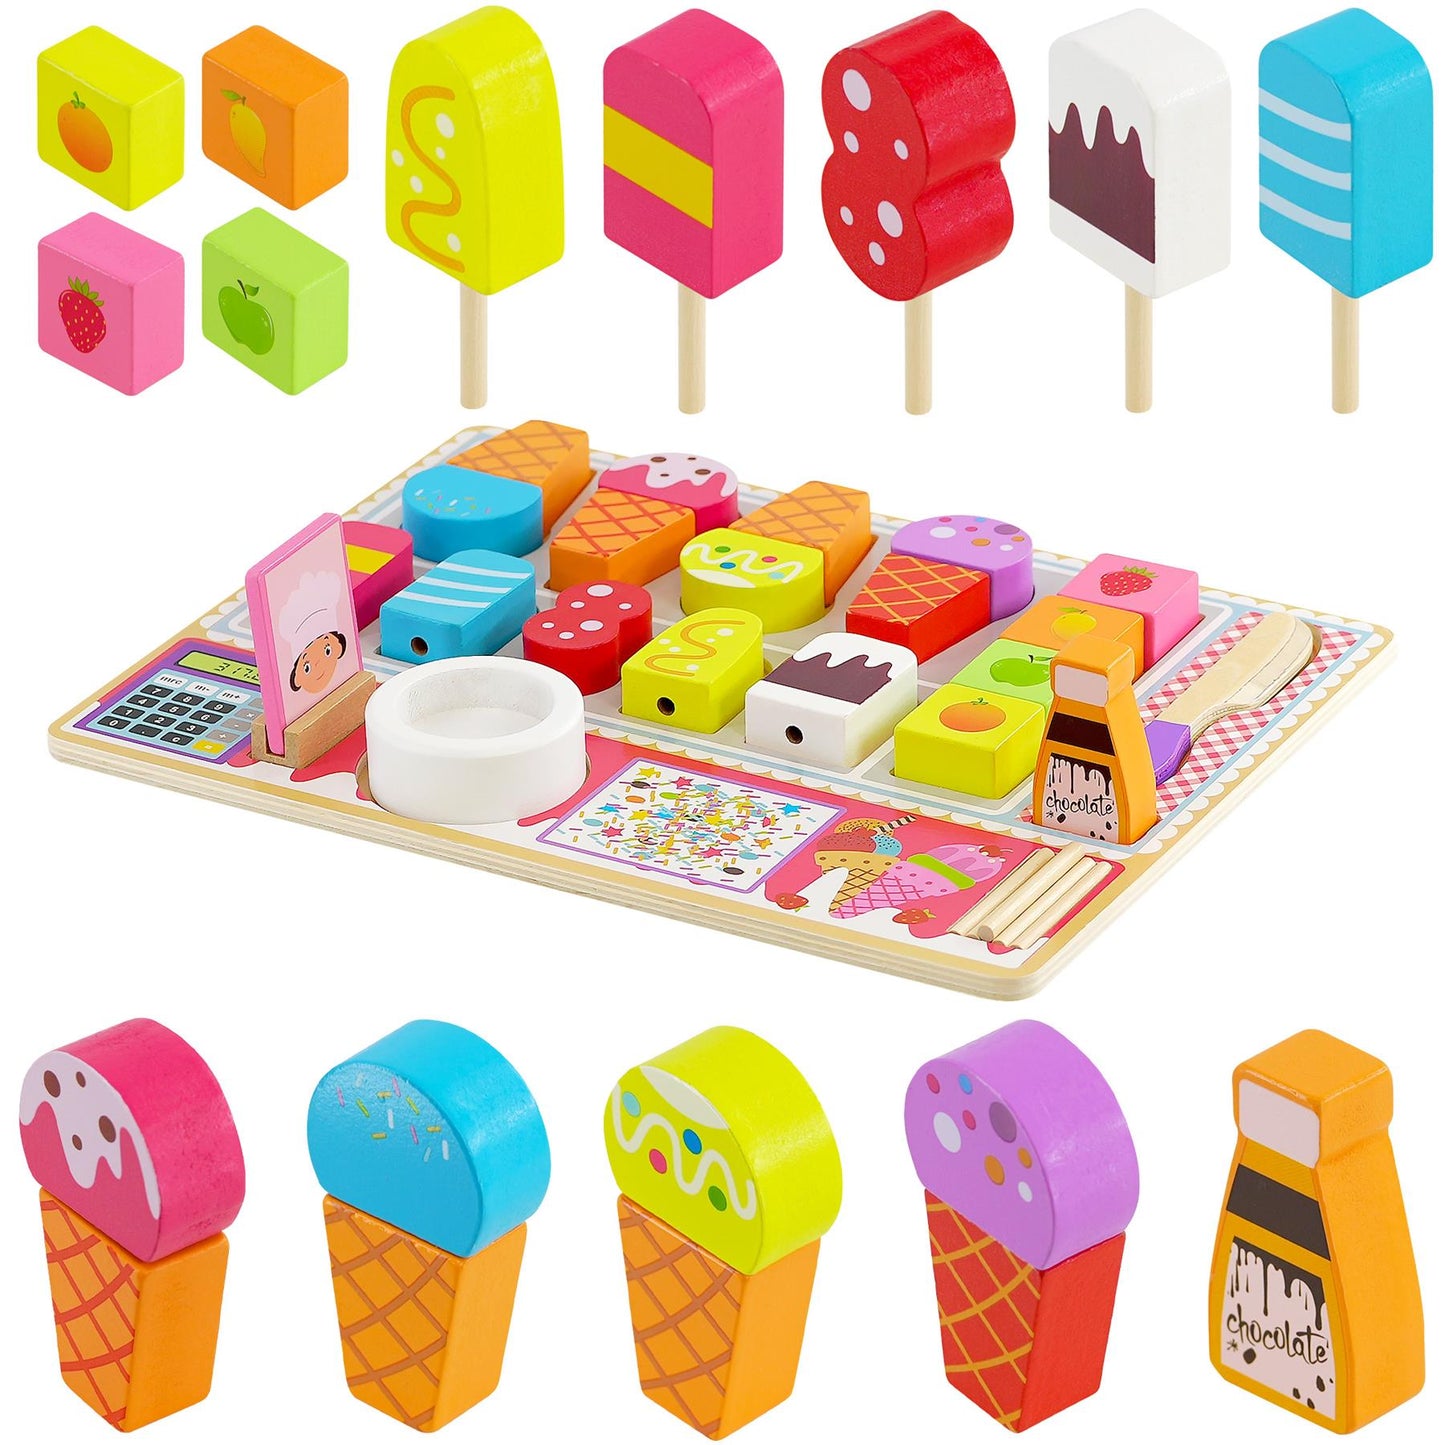 Kids Wooden Ice Cream Shop Set Role Play Toys by The Magic Toy Shop - UKBuyZone